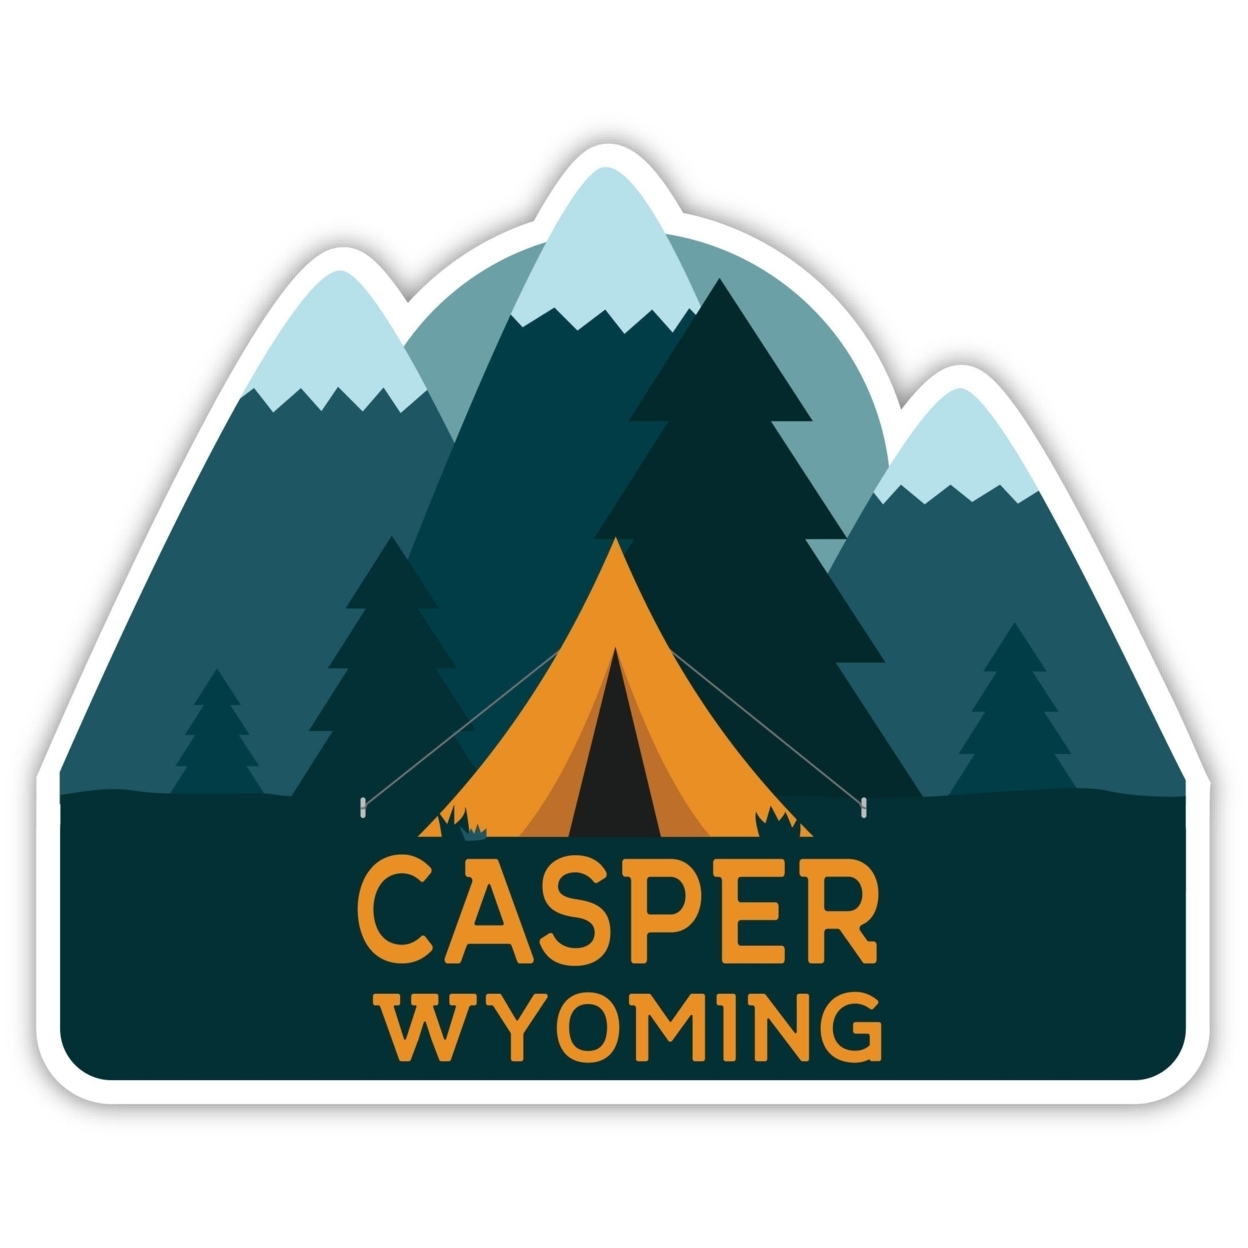 Casper Wyoming Souvenir Decorative Stickers (Choose Theme And Size) - 4-Pack, 6-Inch, Tent